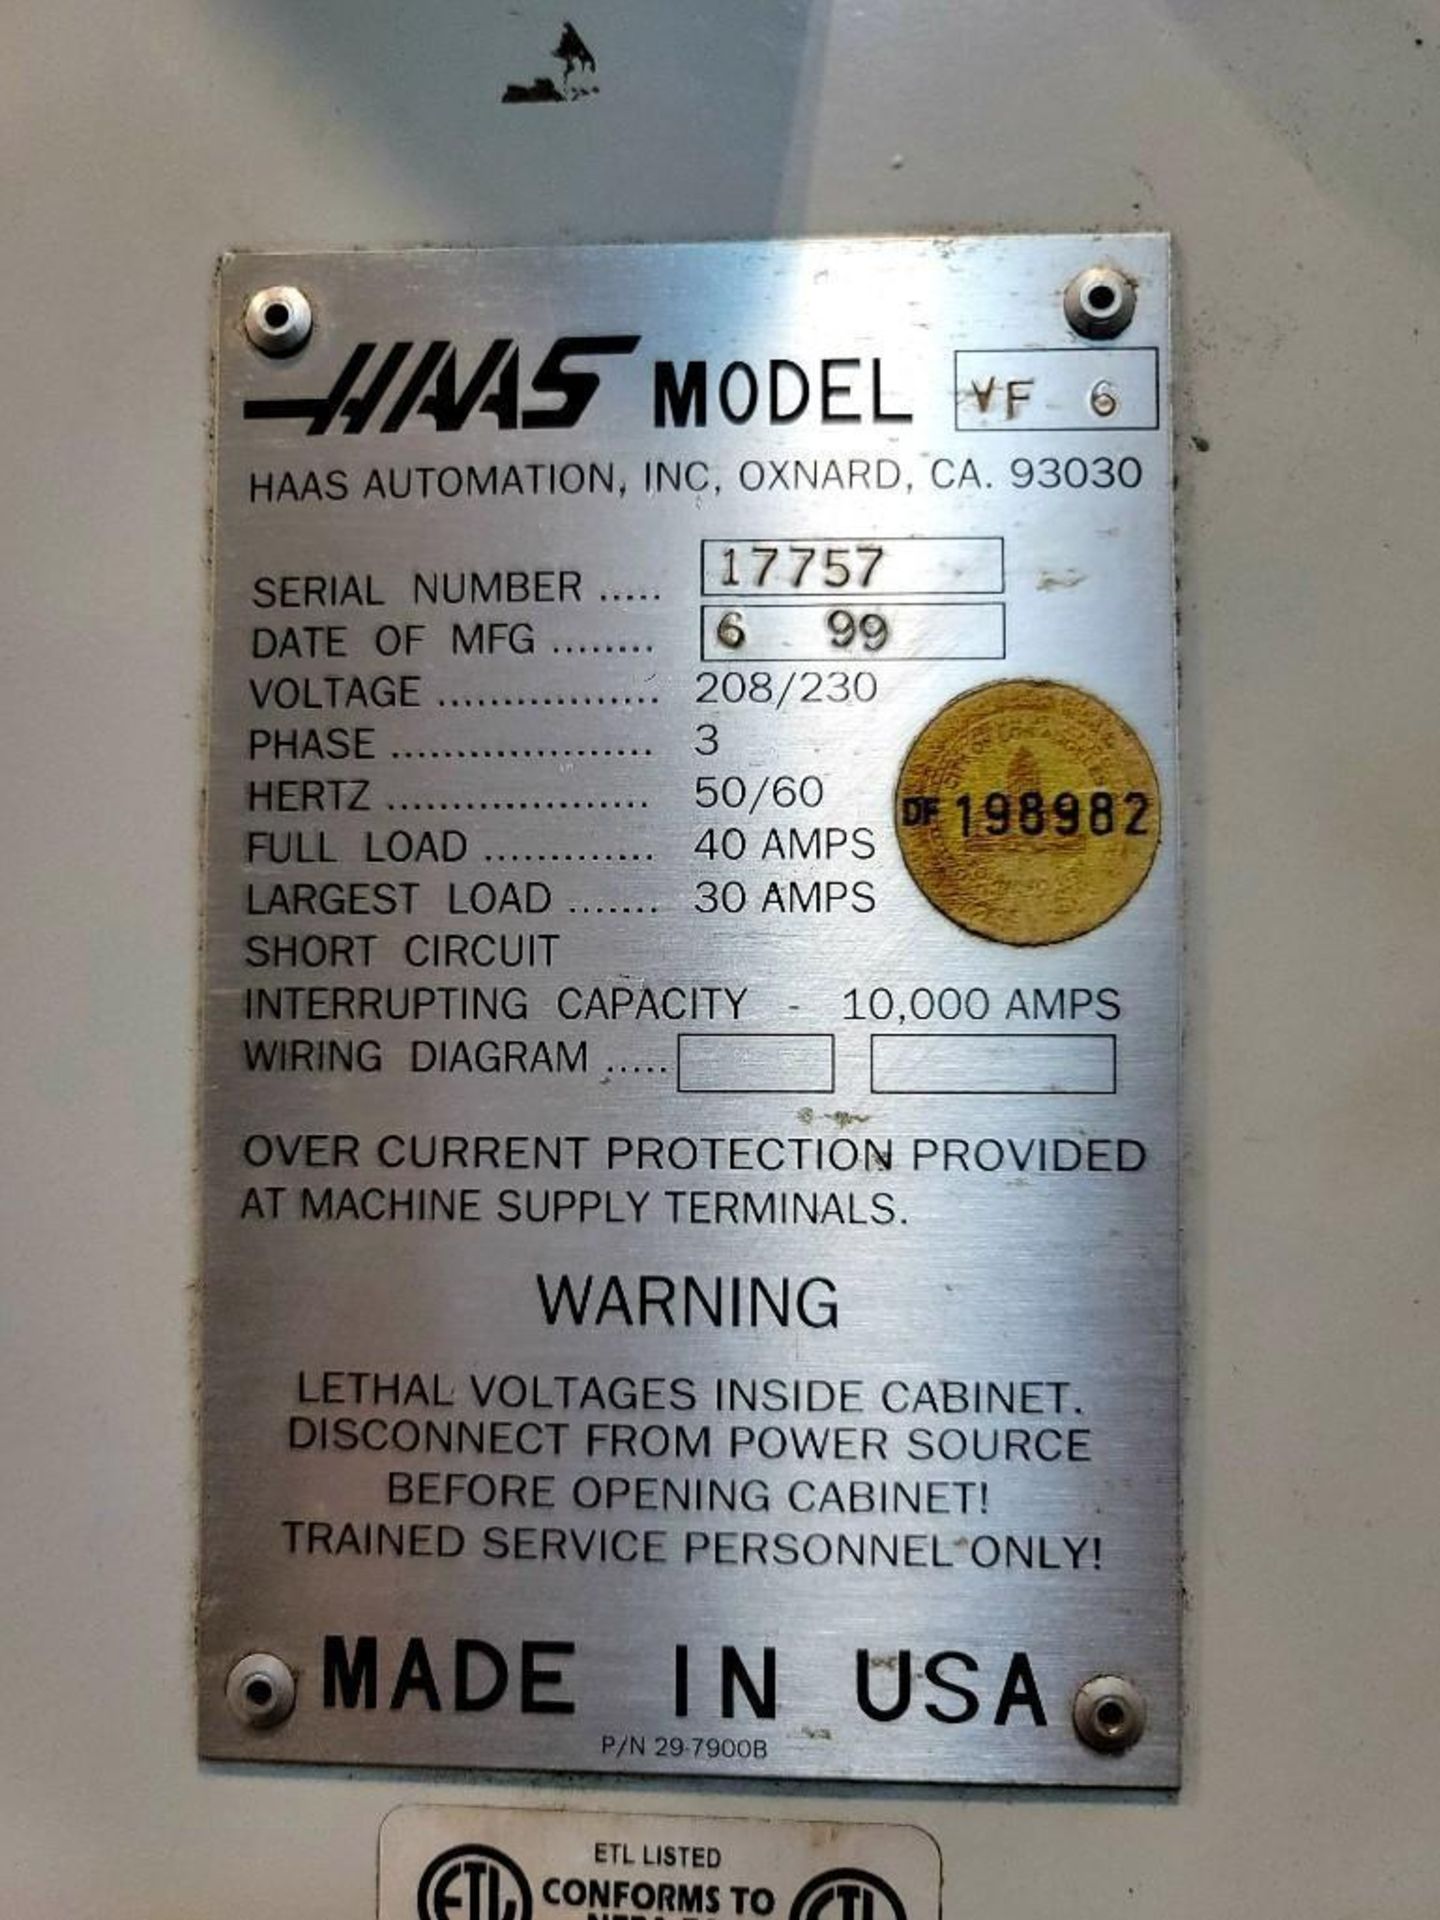 Haas VF-6 CNC Vertical Machining Center - Image 15 of 15